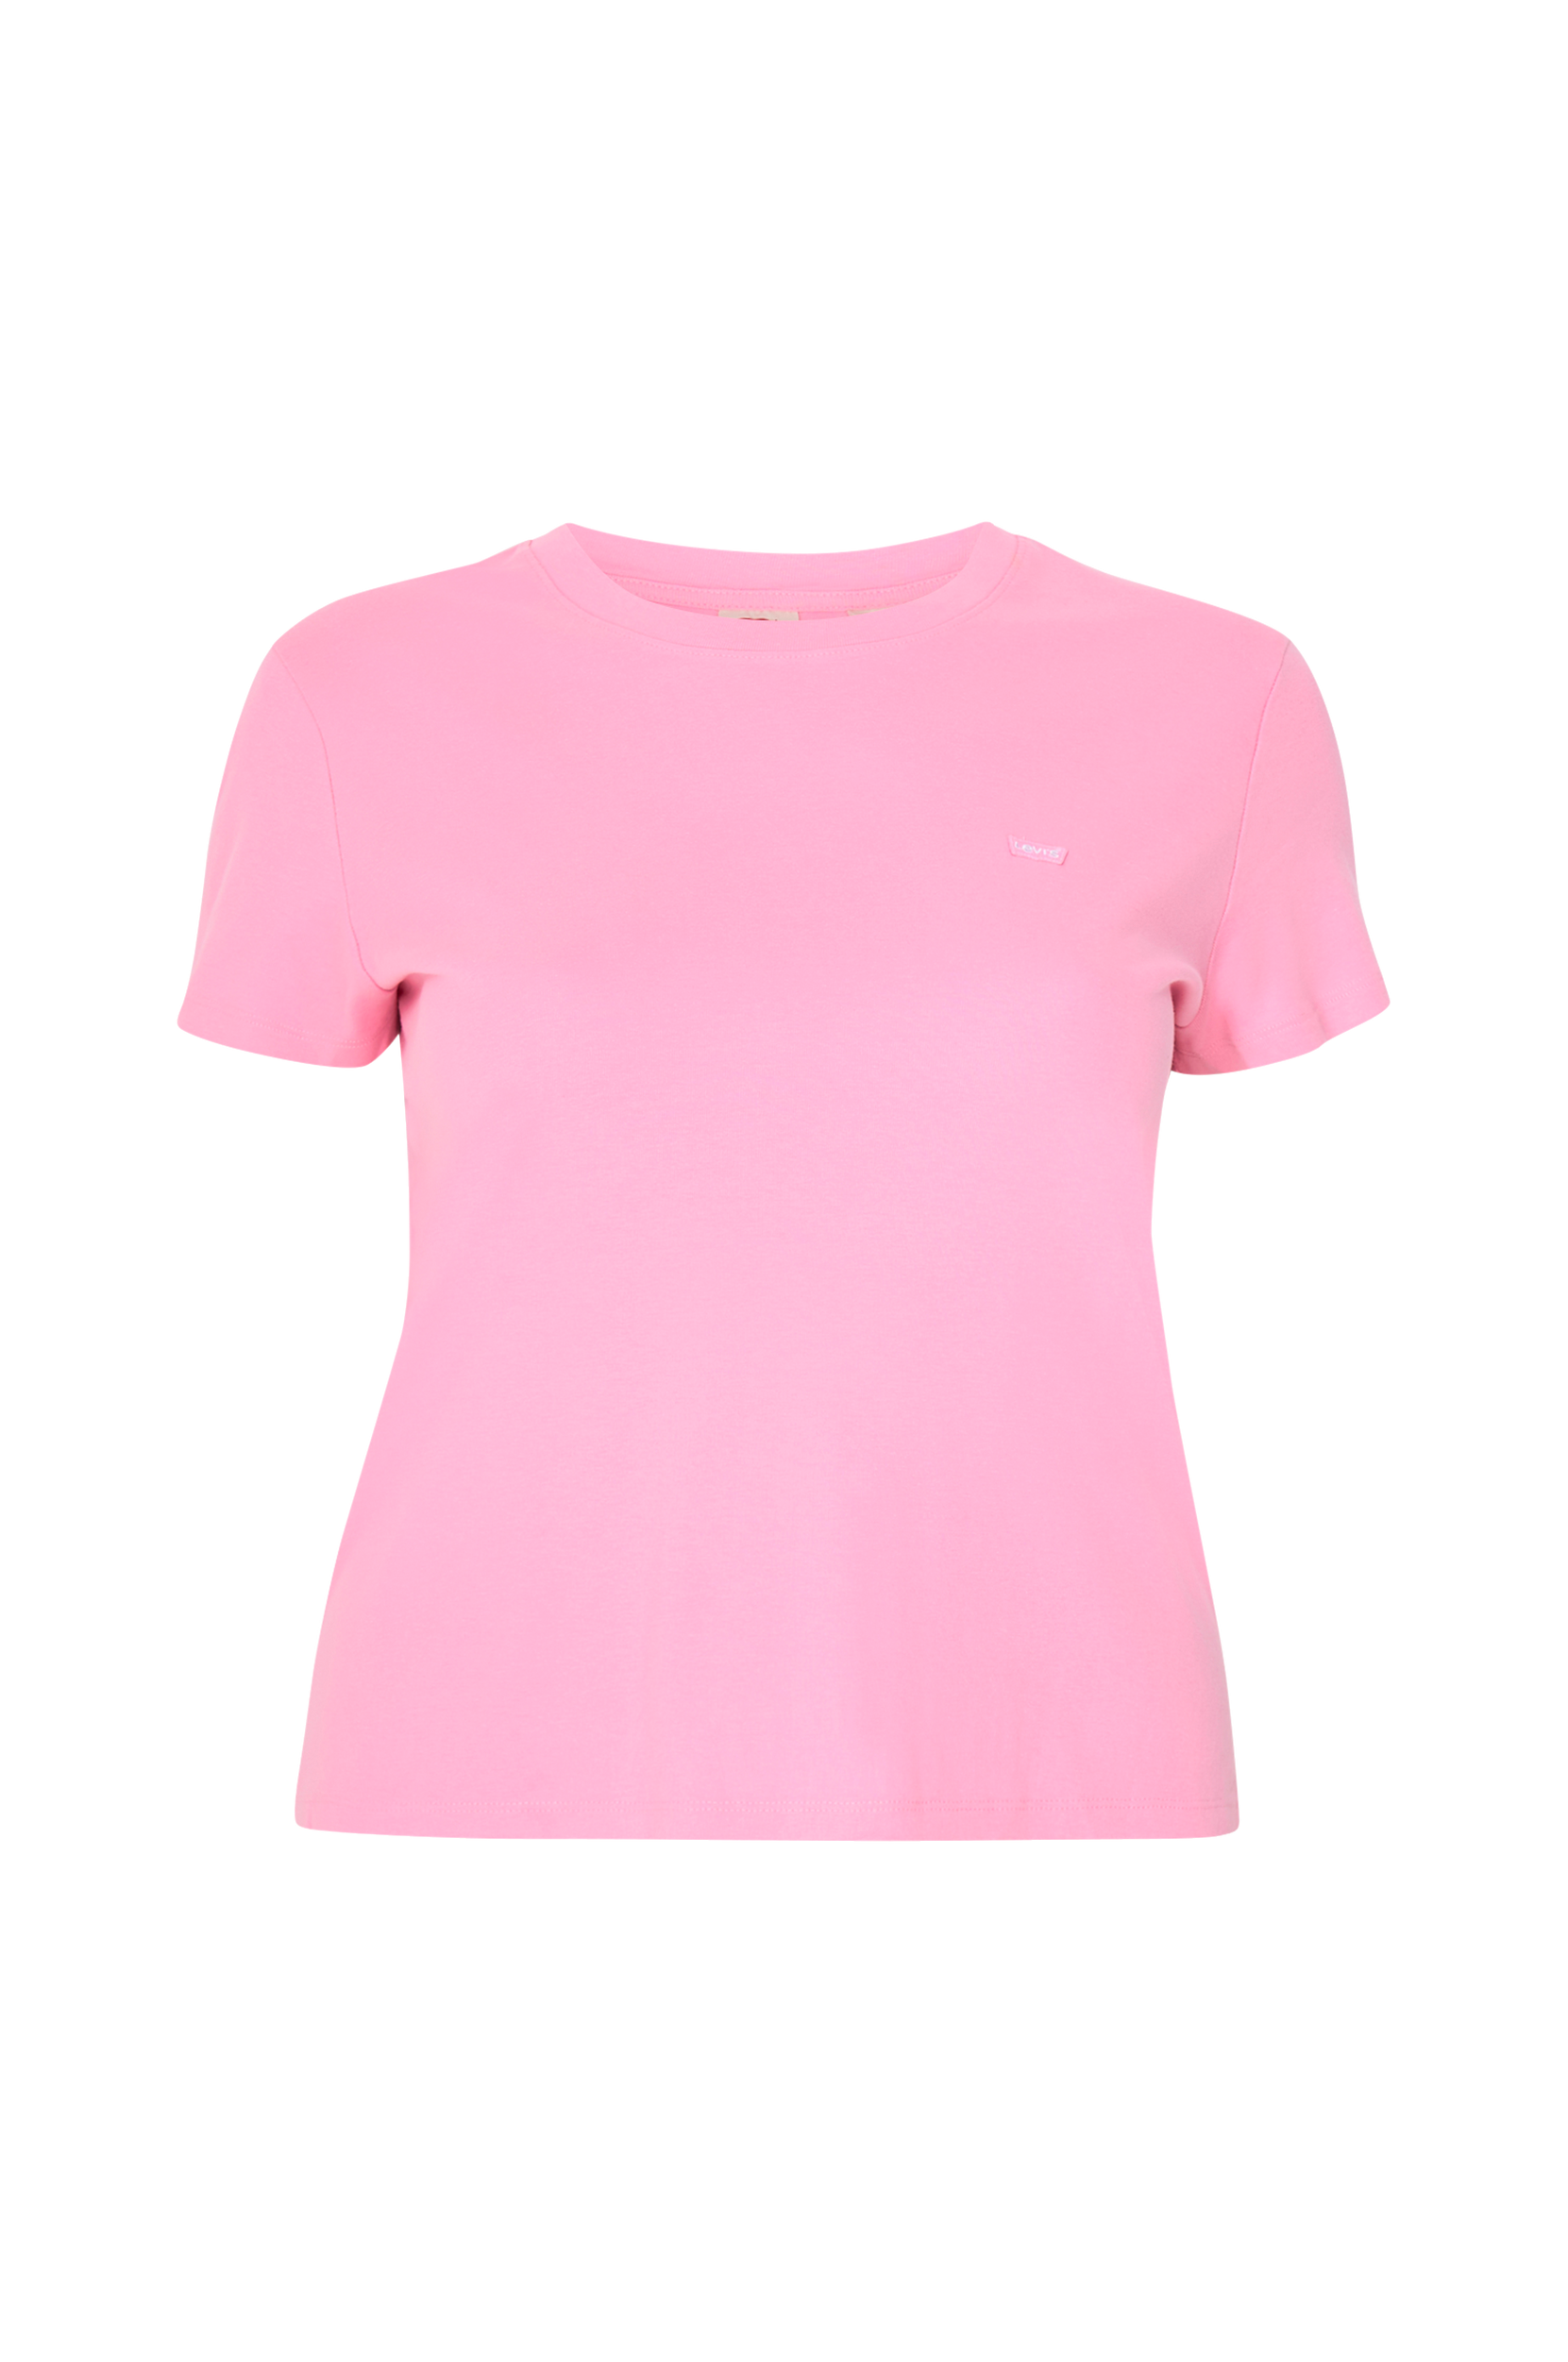 Levi's Plus - Top PL SS Baby Tee Prism Pink - Rosa - 54/56